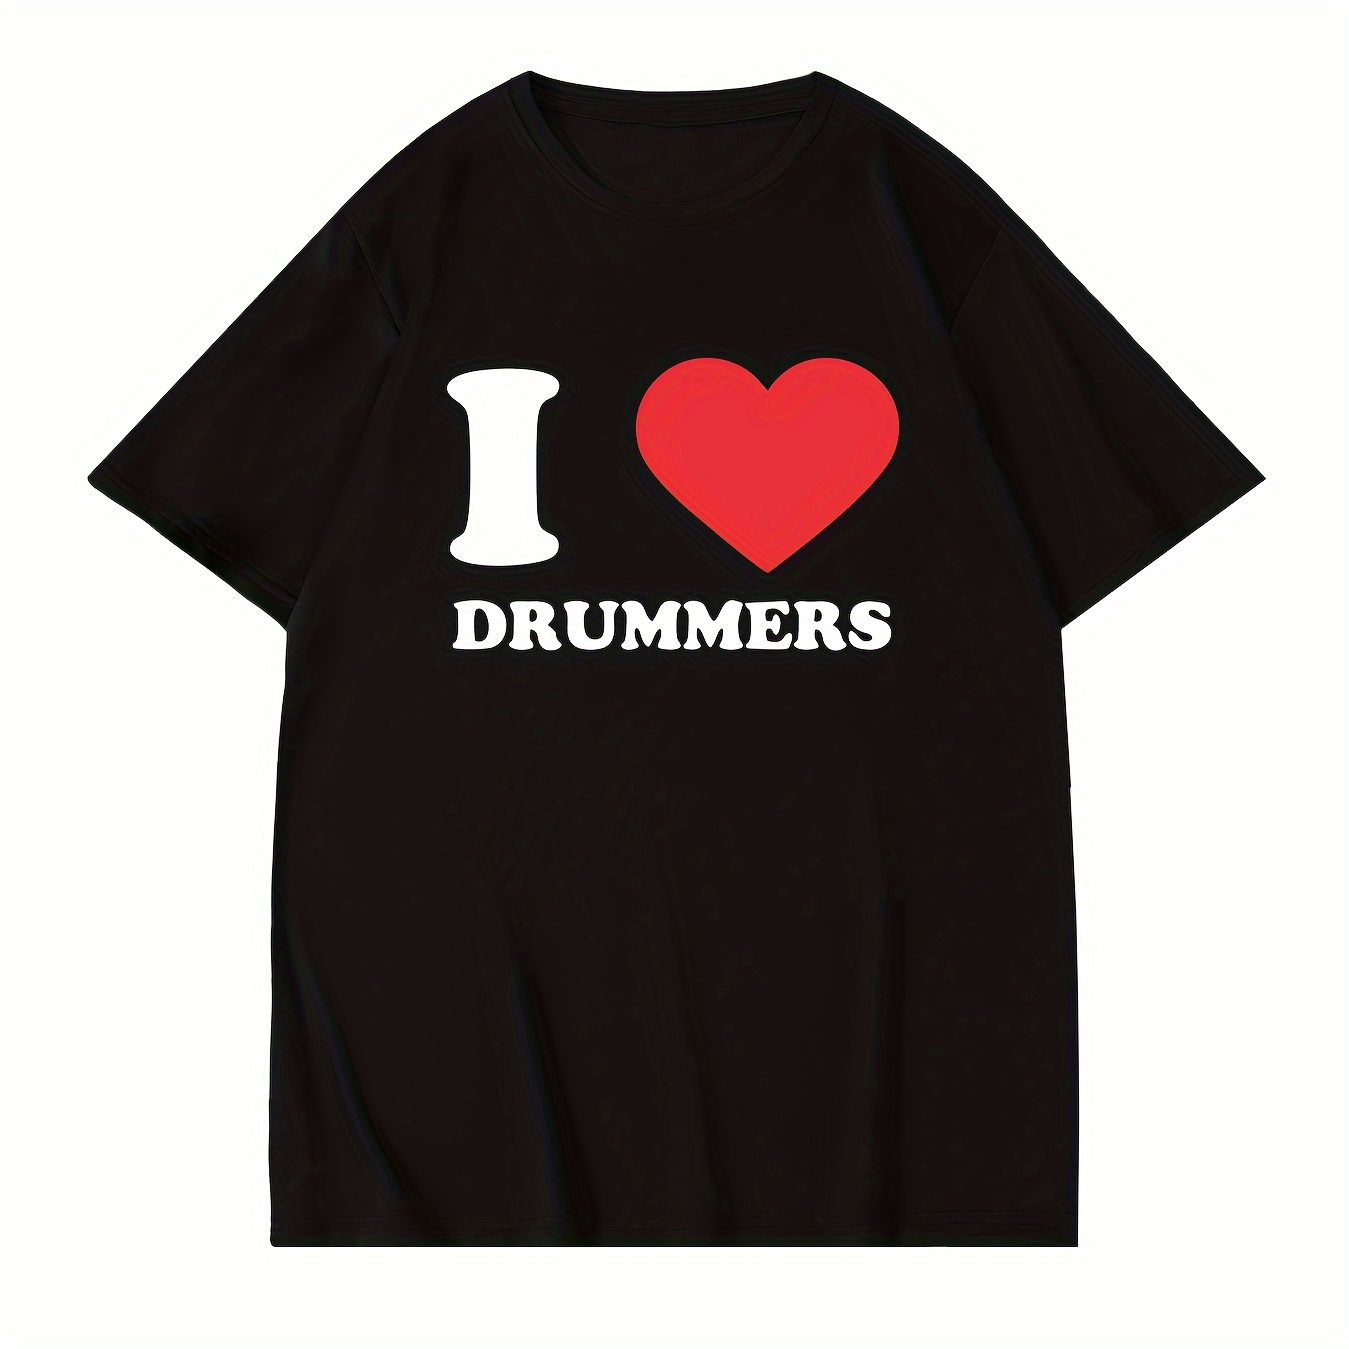 

I Love Drummers Print T Shirt, Tees For Men, Casual Short Sleeve T-shirt For Summer